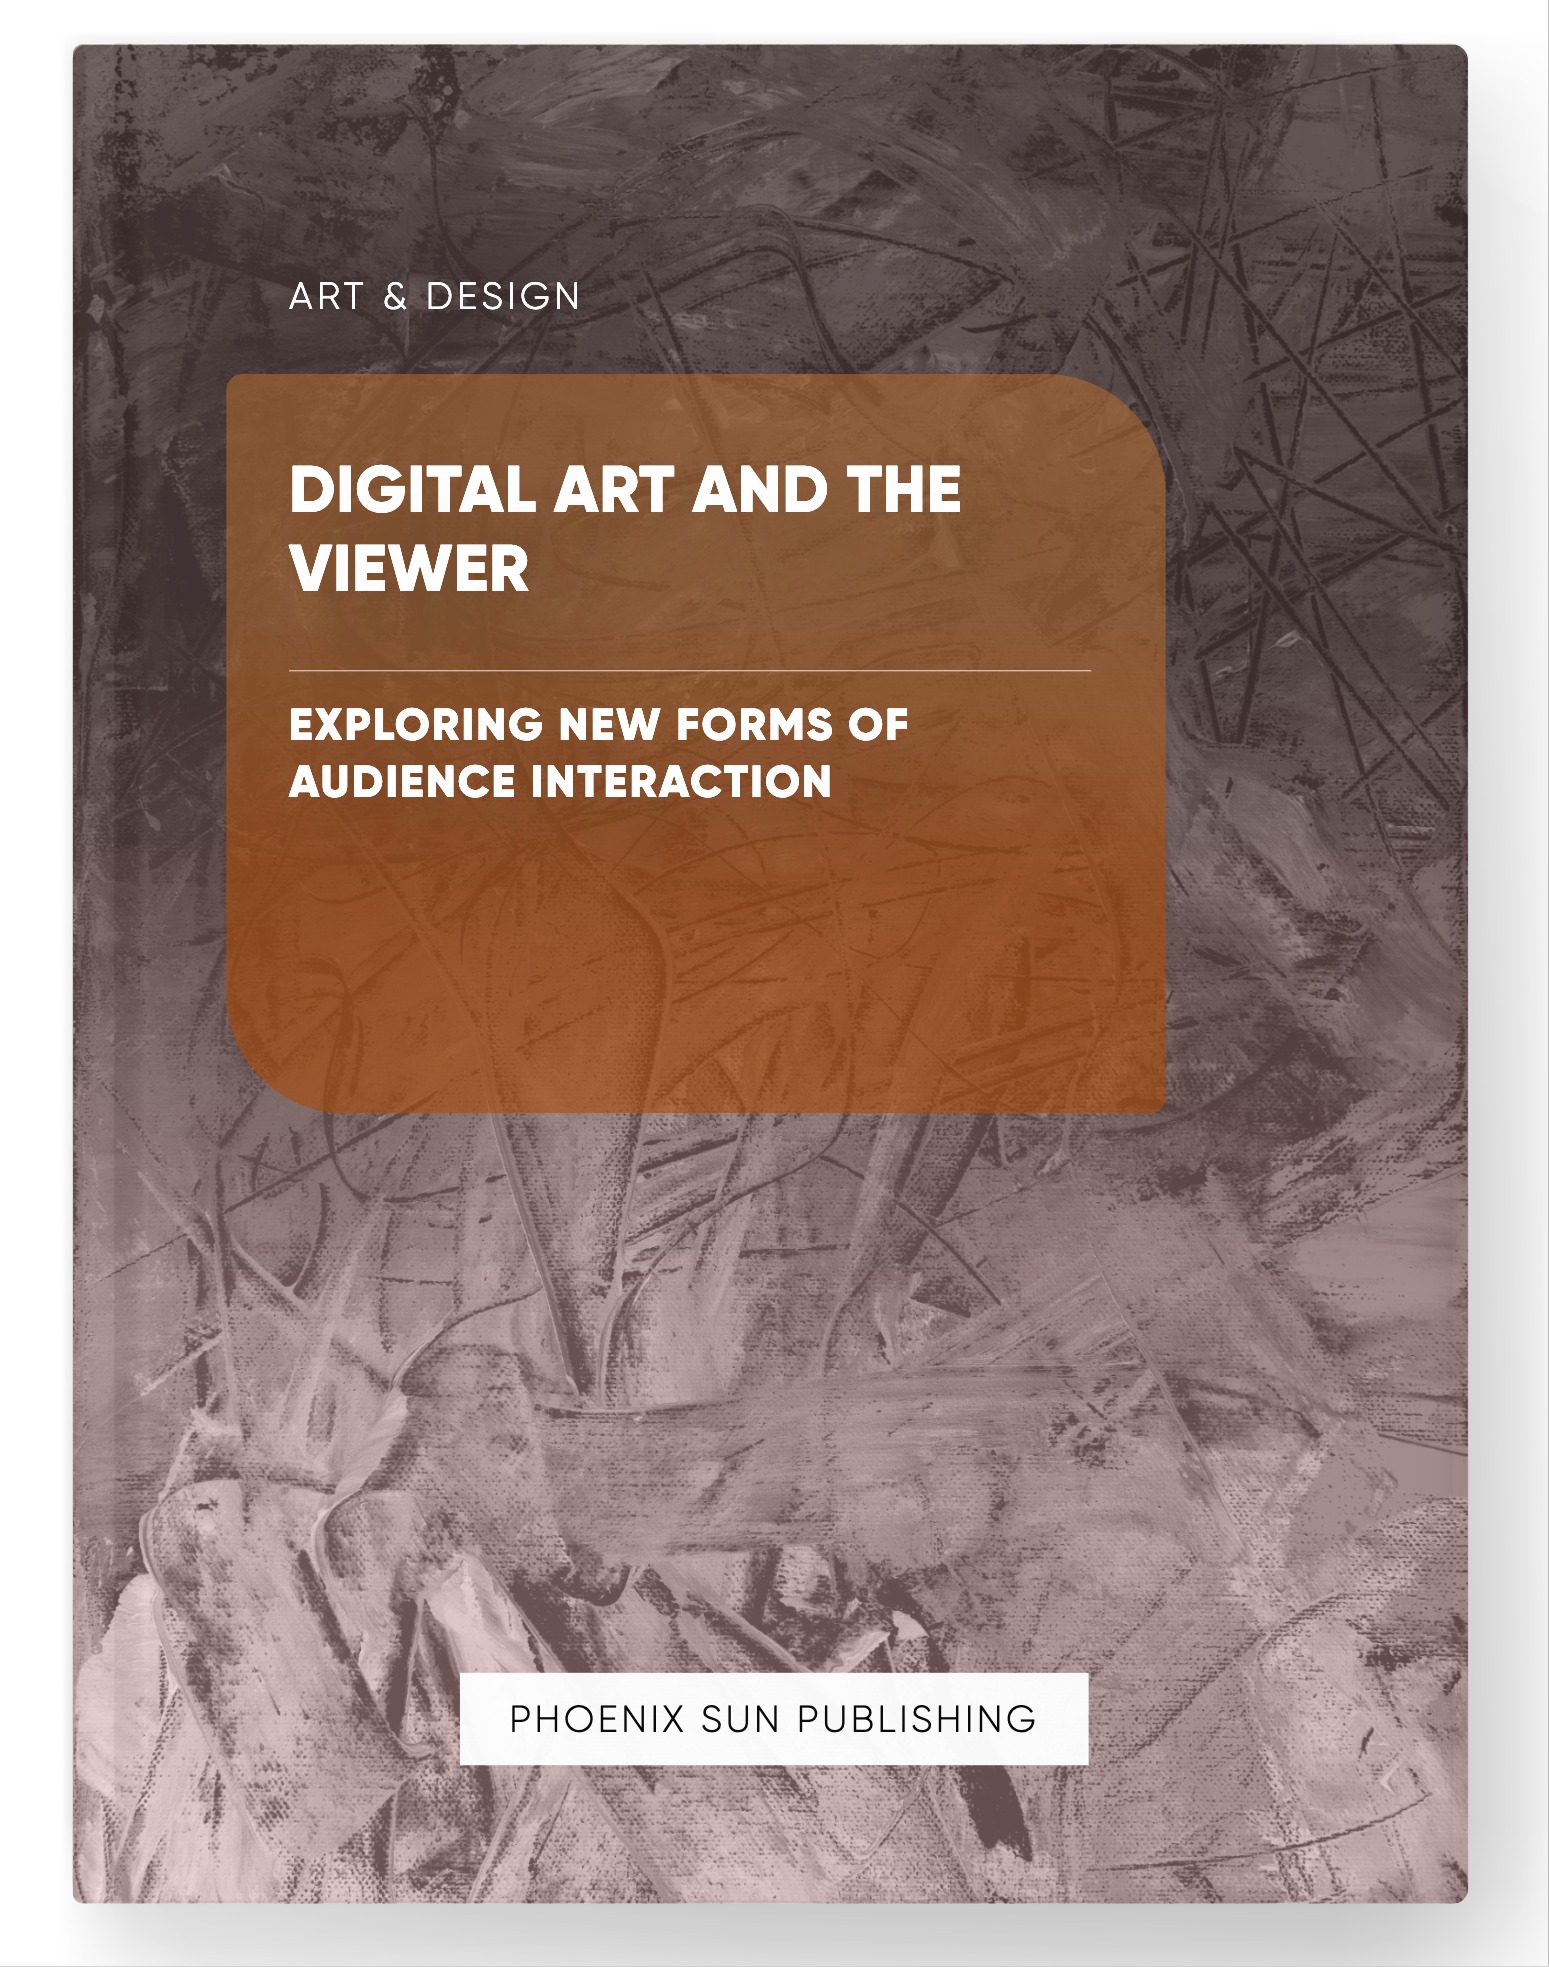 Digital Art and the Viewer – Exploring New Forms of Audience Interaction